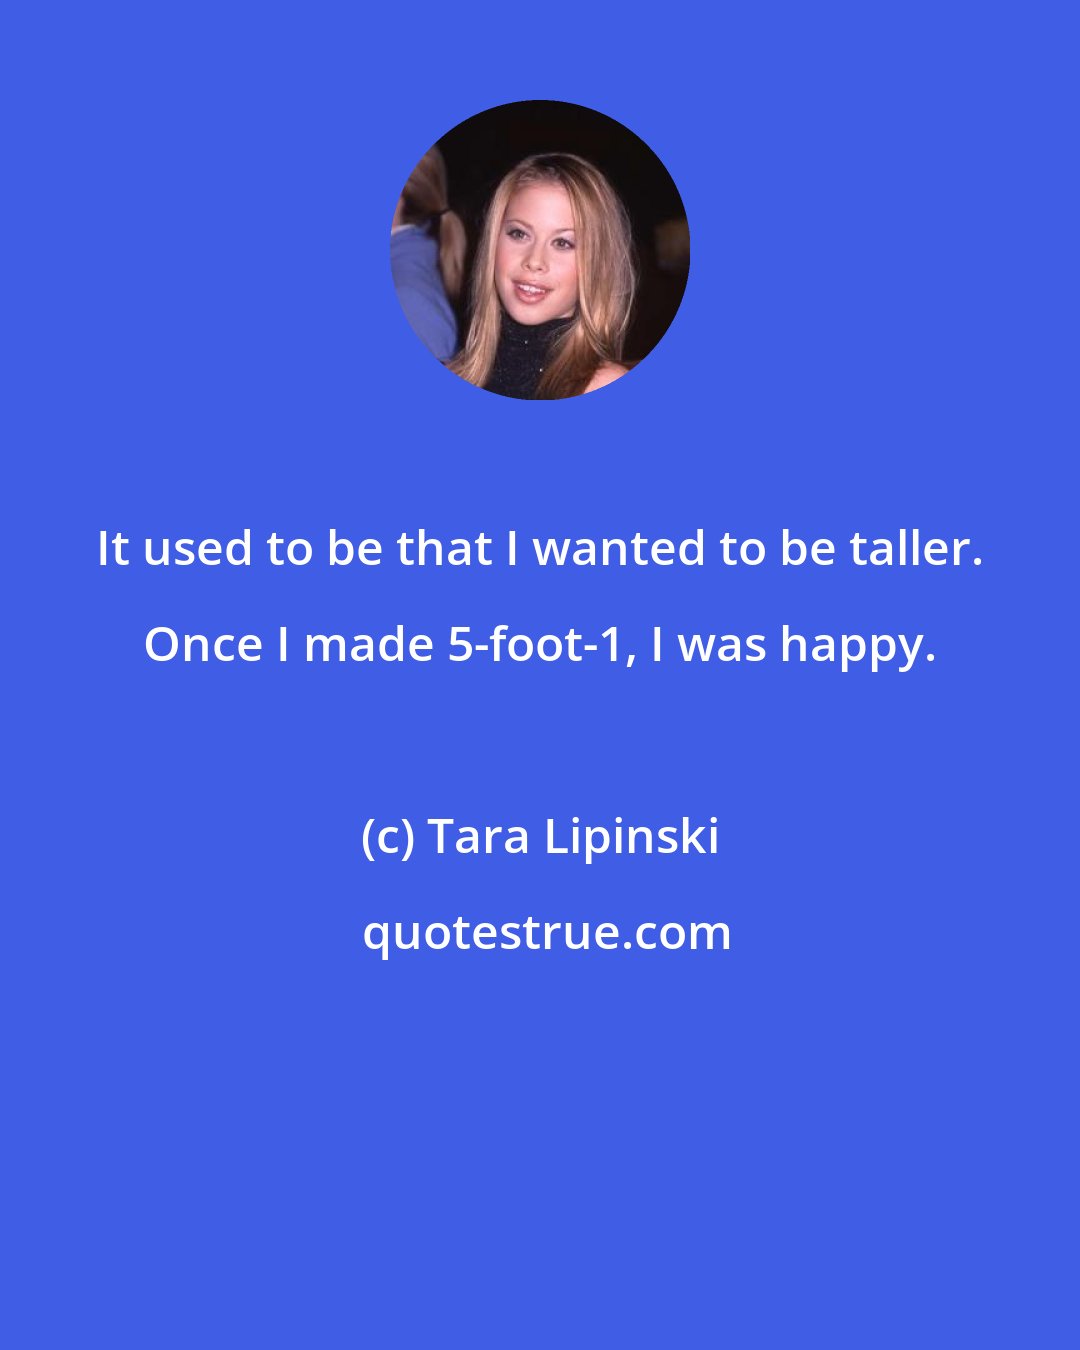 Tara Lipinski: It used to be that I wanted to be taller. Once I made 5-foot-1, I was happy.